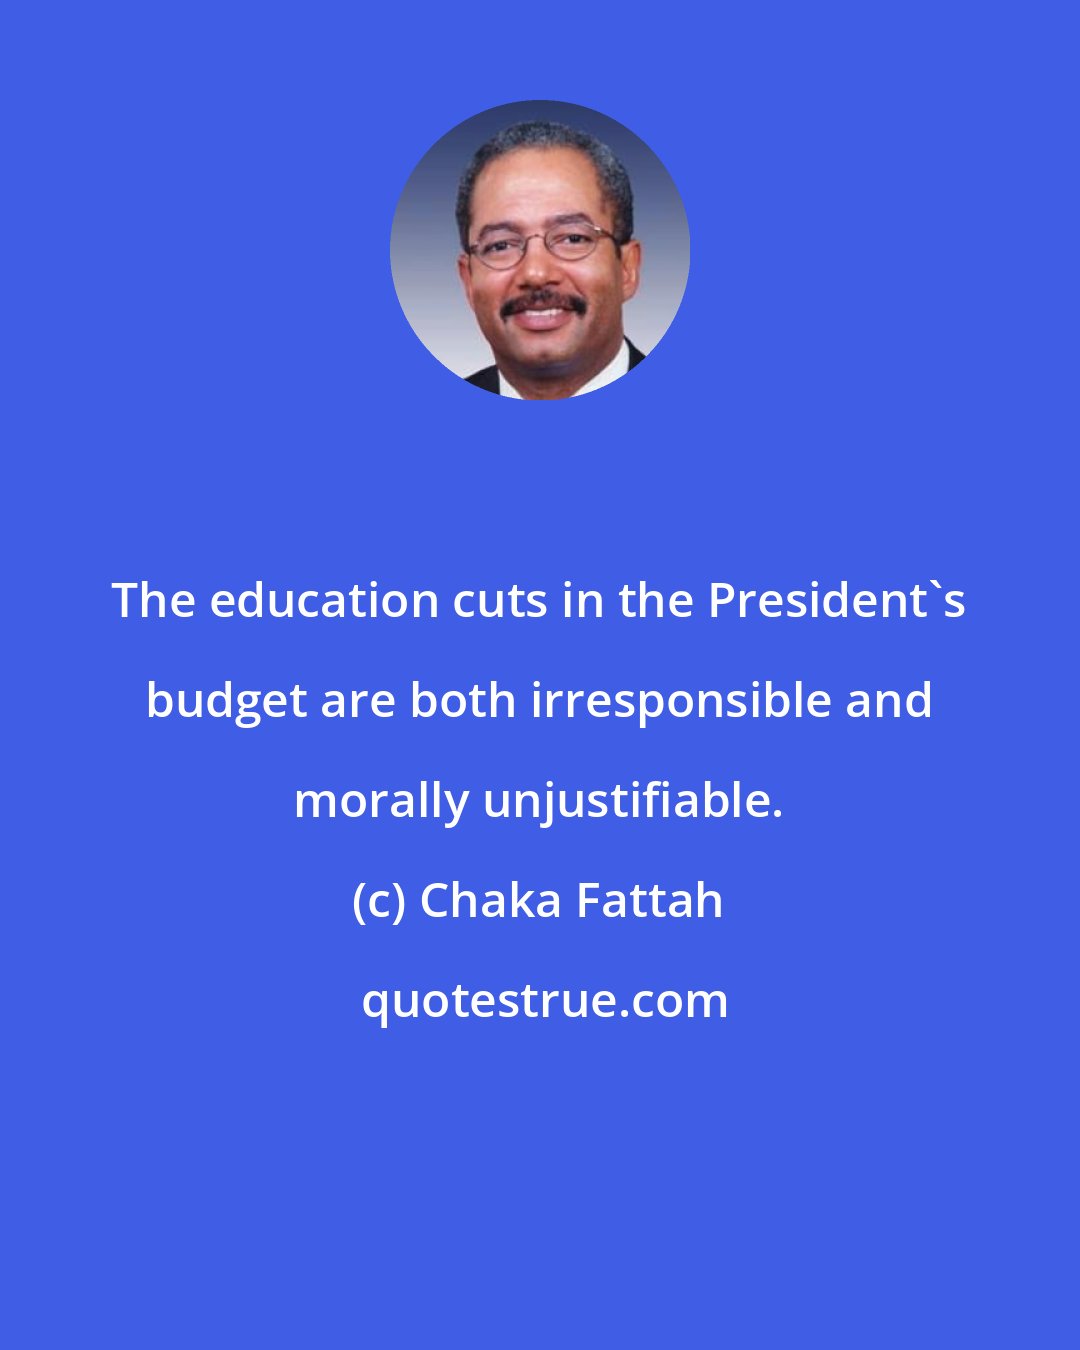 Chaka Fattah: The education cuts in the President's budget are both irresponsible and morally unjustifiable.